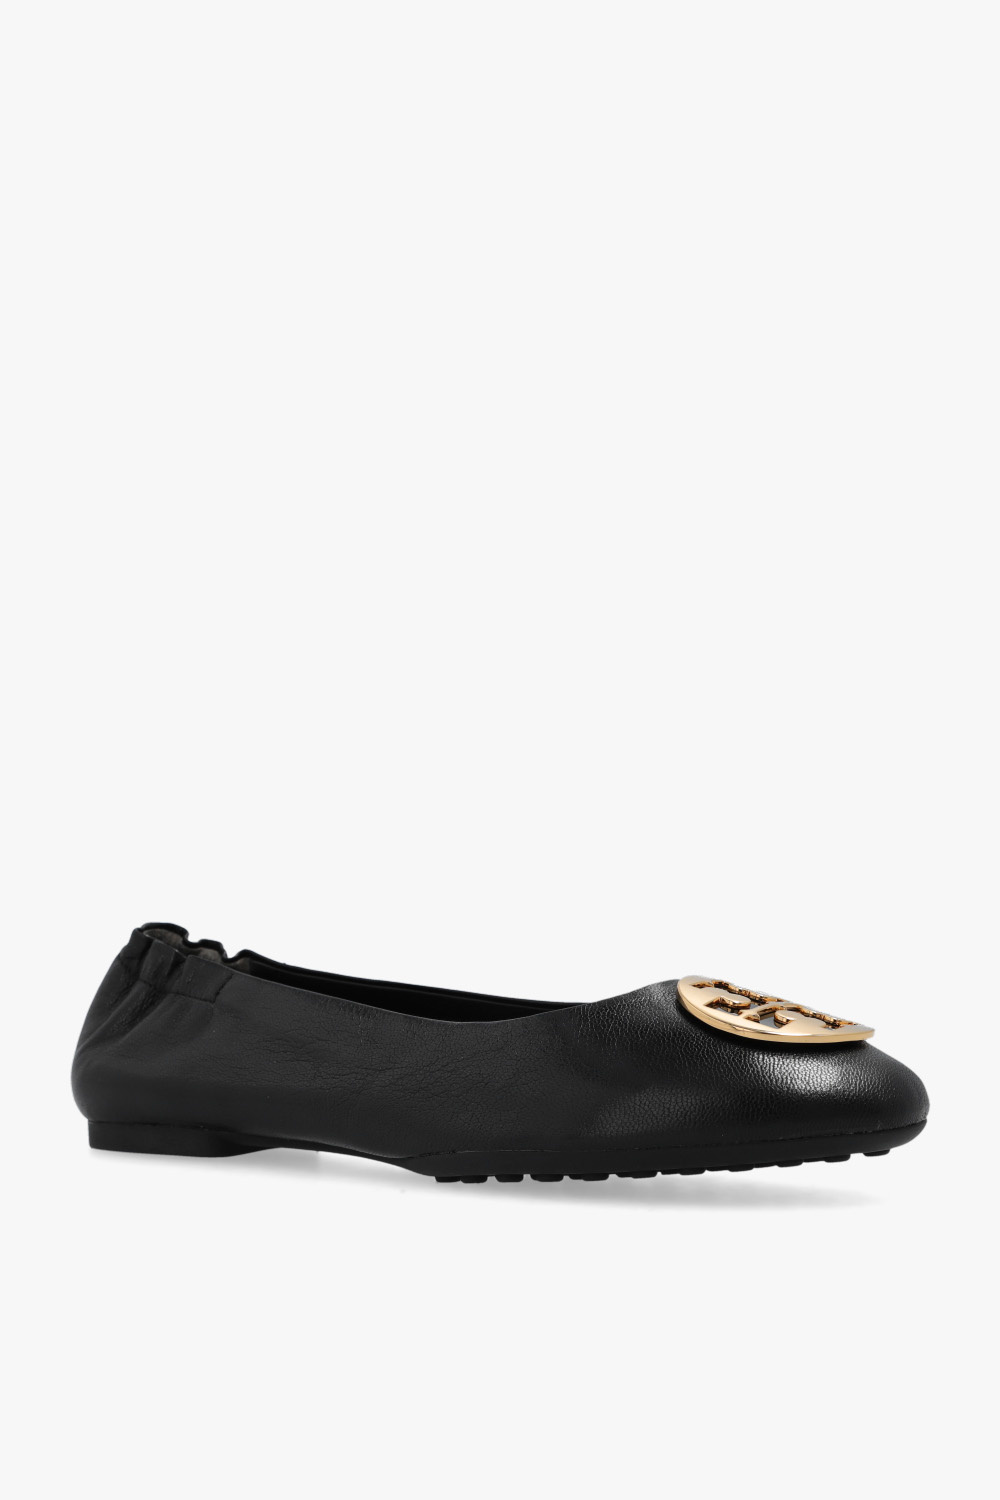 Tory Burch ‘Claire’ leather ballet Cuir